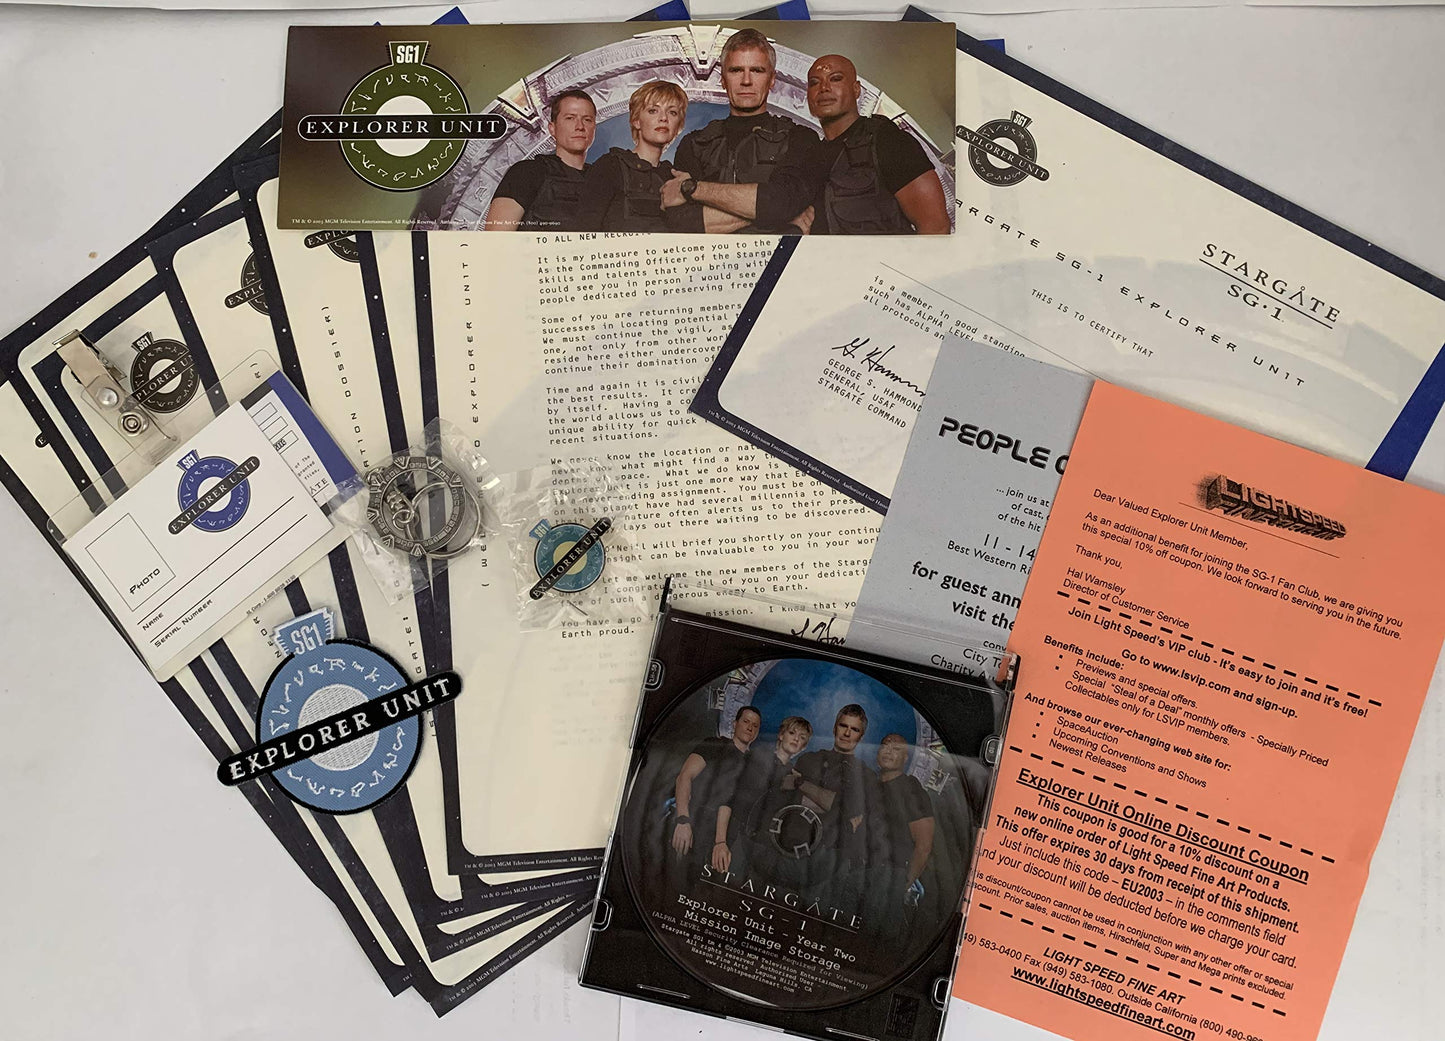 Vintage Ultra Rare 2003 Stargate SG-1 Explorer Unit Field Pack Year Two - Includes CD-Rom, Photos, Poster, Sticker, I.D Badges, Pin, Keyring & Classified Information - Former Shop Display Set